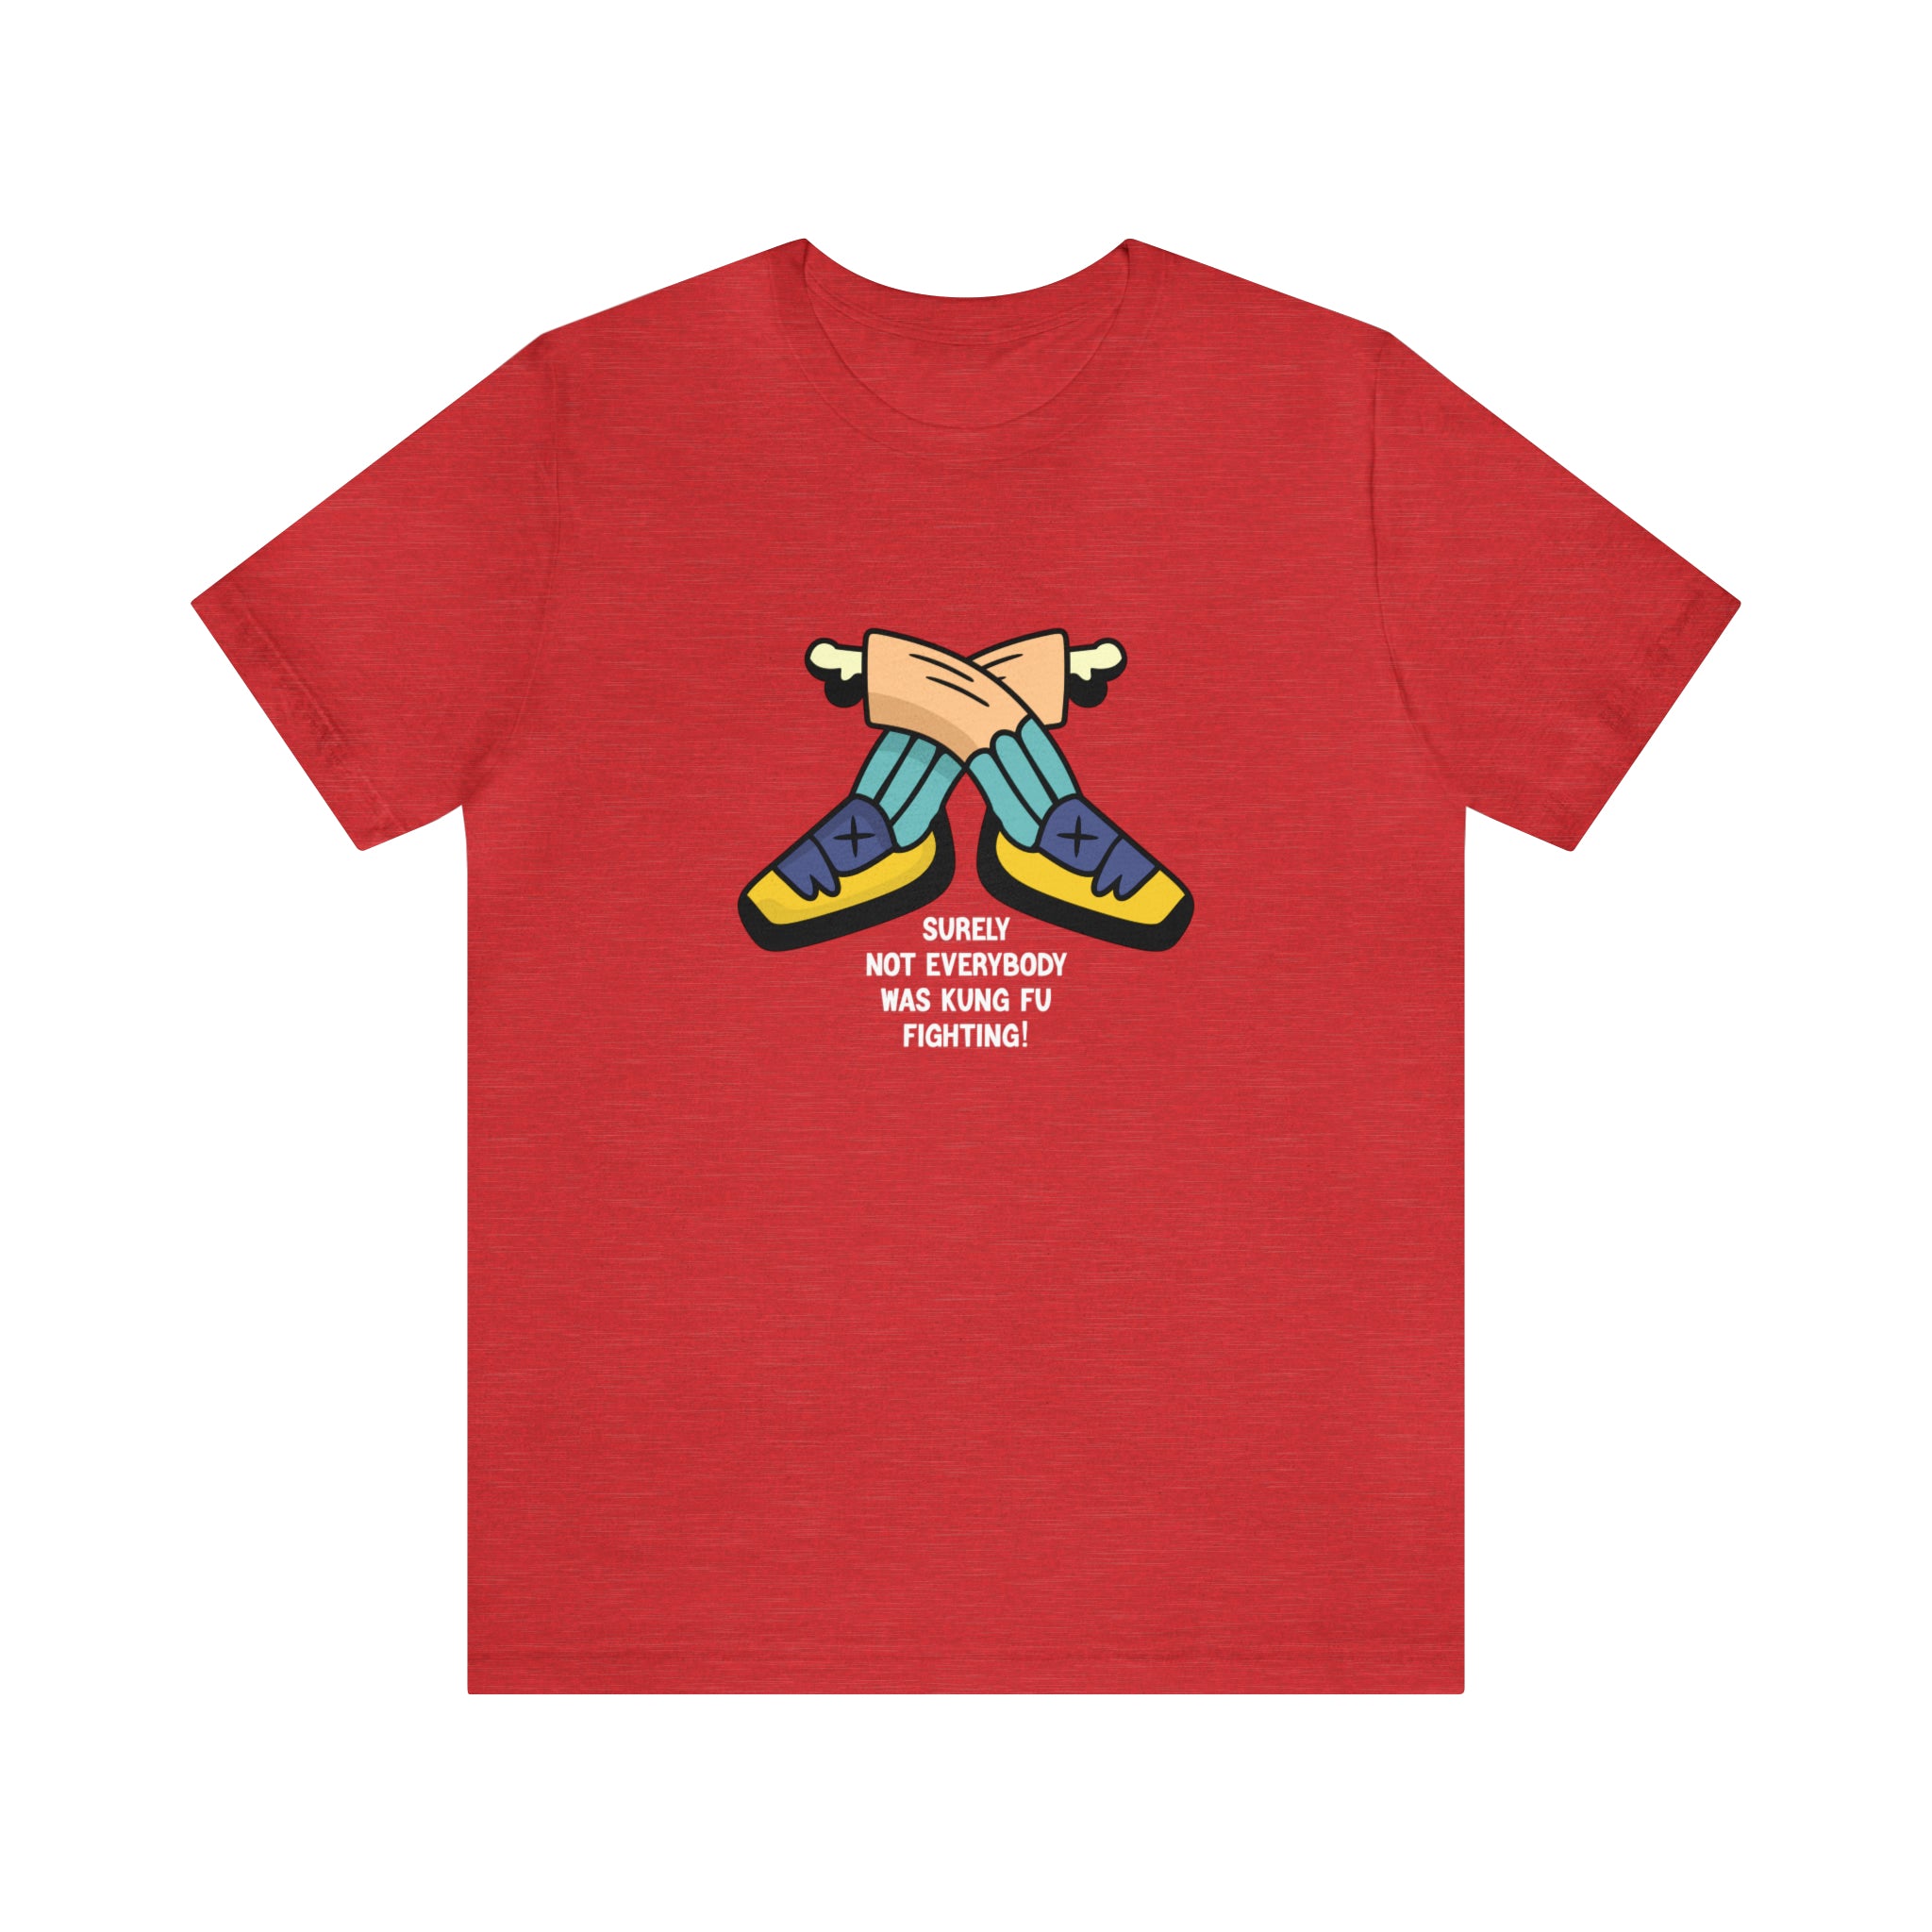 A Not Everybody Was Kung Fu Fighting T-Shirt featuring a pair of shoes.